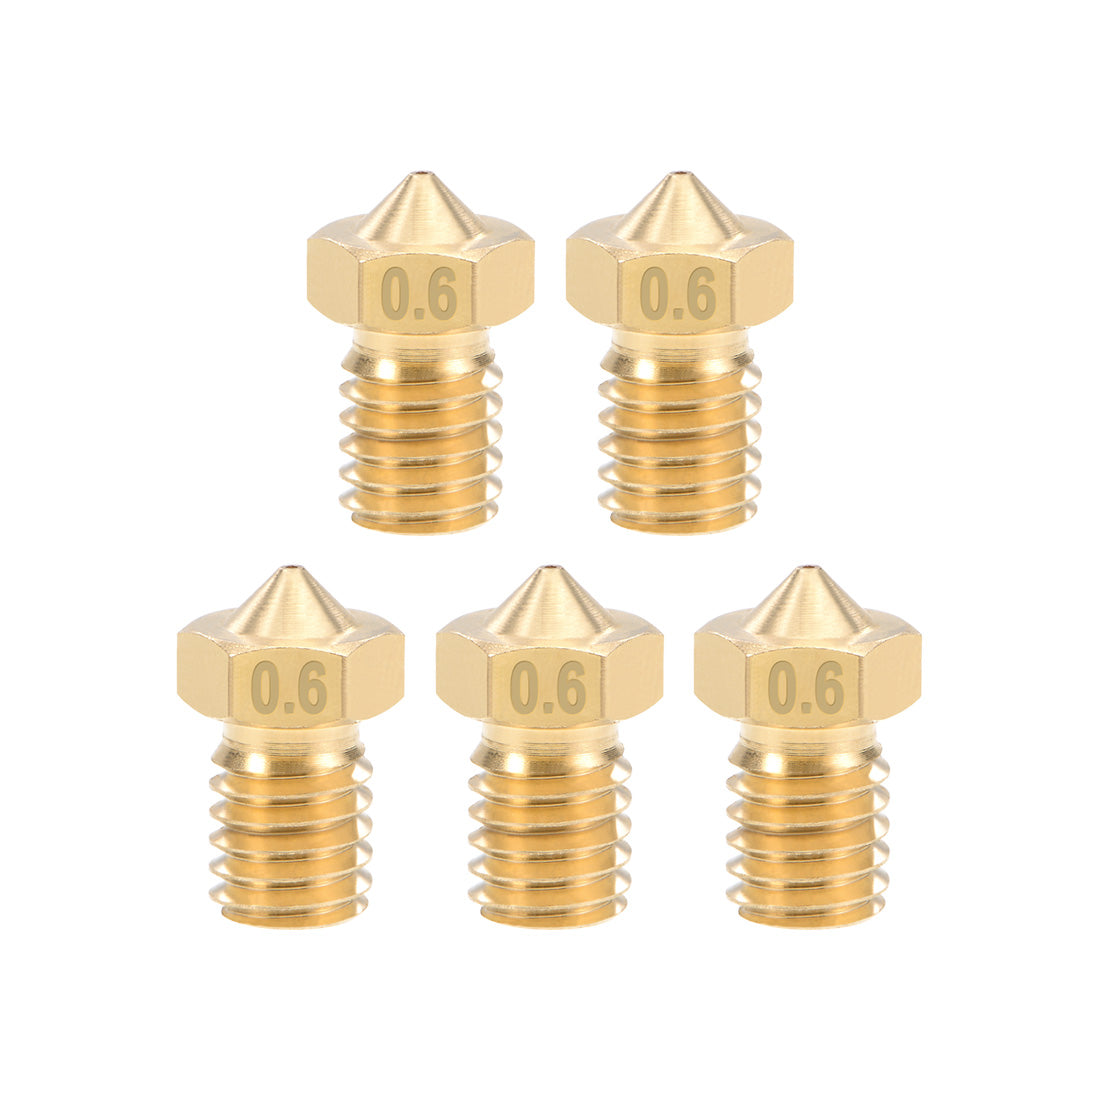 uxcell Uxcell 0.6mm 3D Printer Nozzle Head M6 for V5 V6 1.75mm Extruder Print, Brass 5pcs